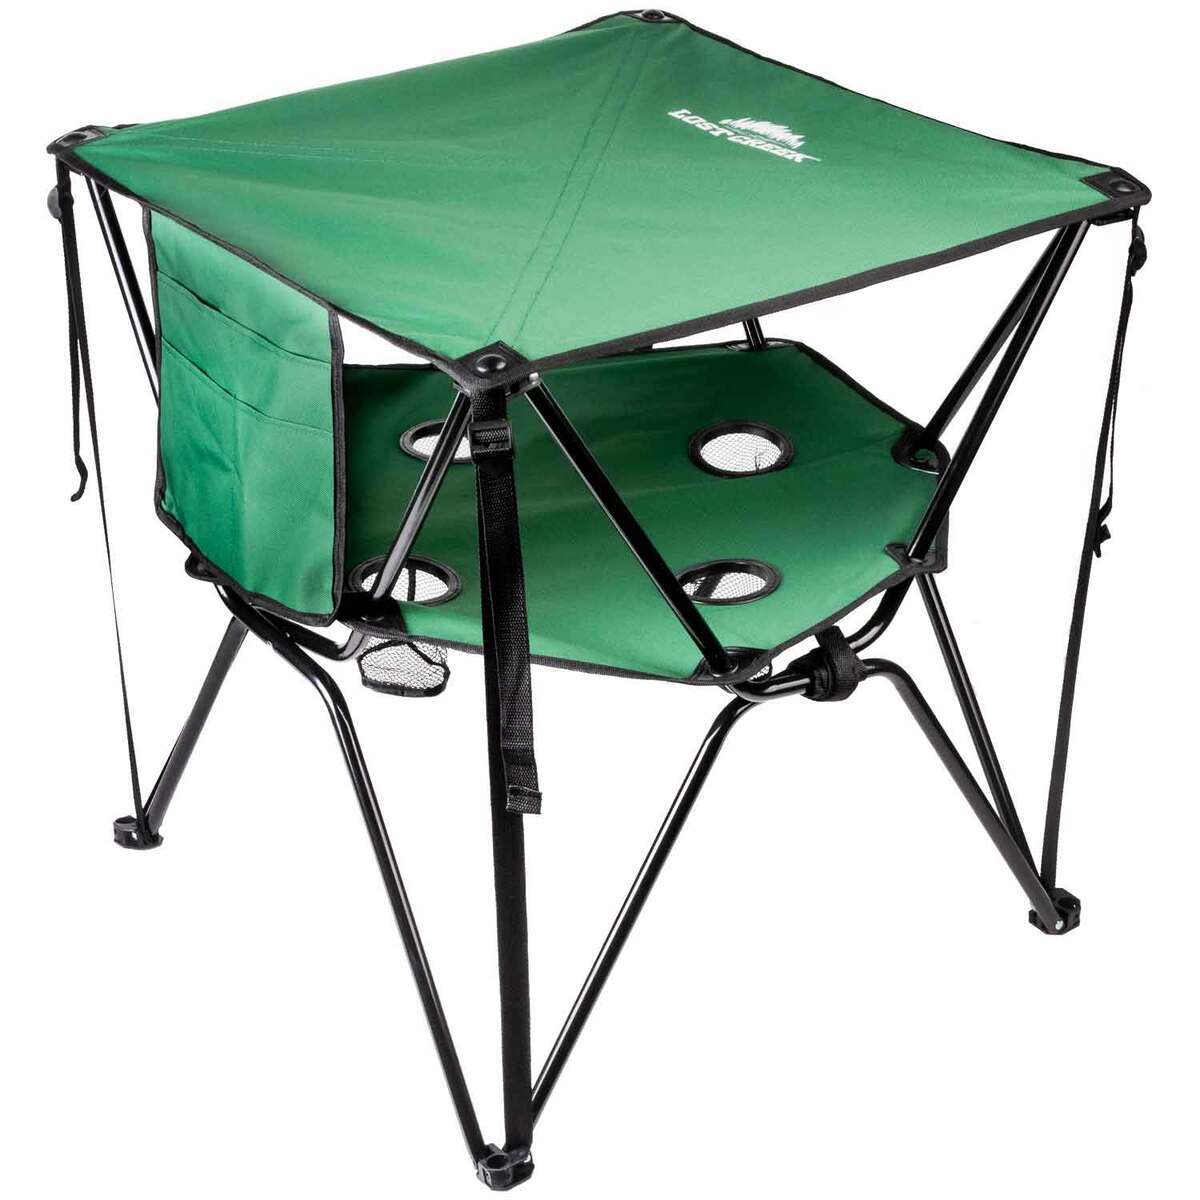 Lost Creek Compact Ice Fishing Table - Green/Black by Sportsman's Warehouse